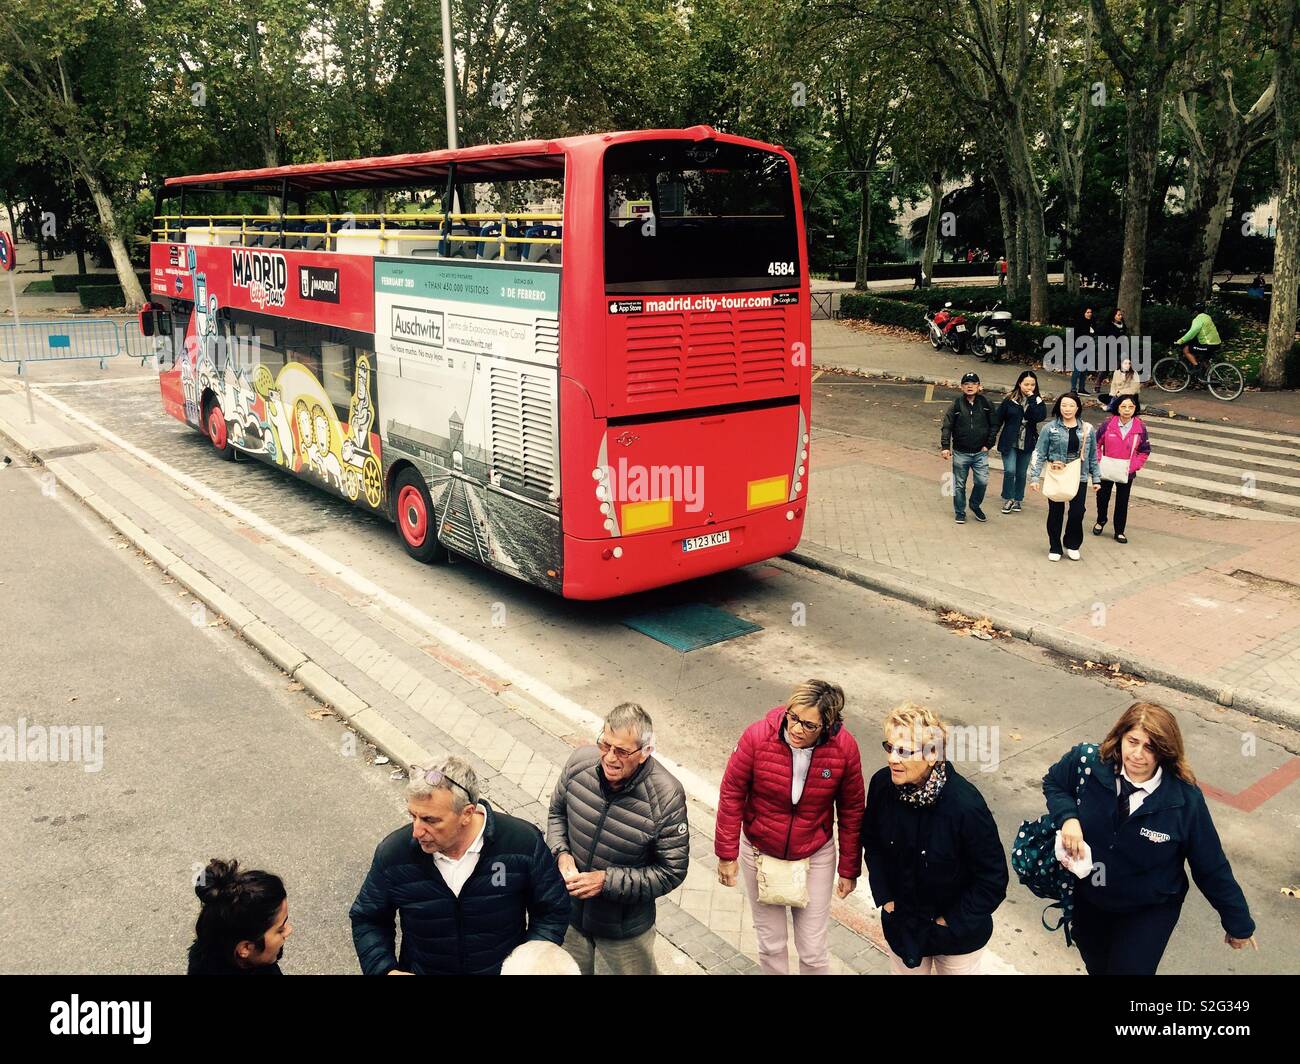 Madrid city tour sightseeing bus parked in public area with people standing around Stock Photo